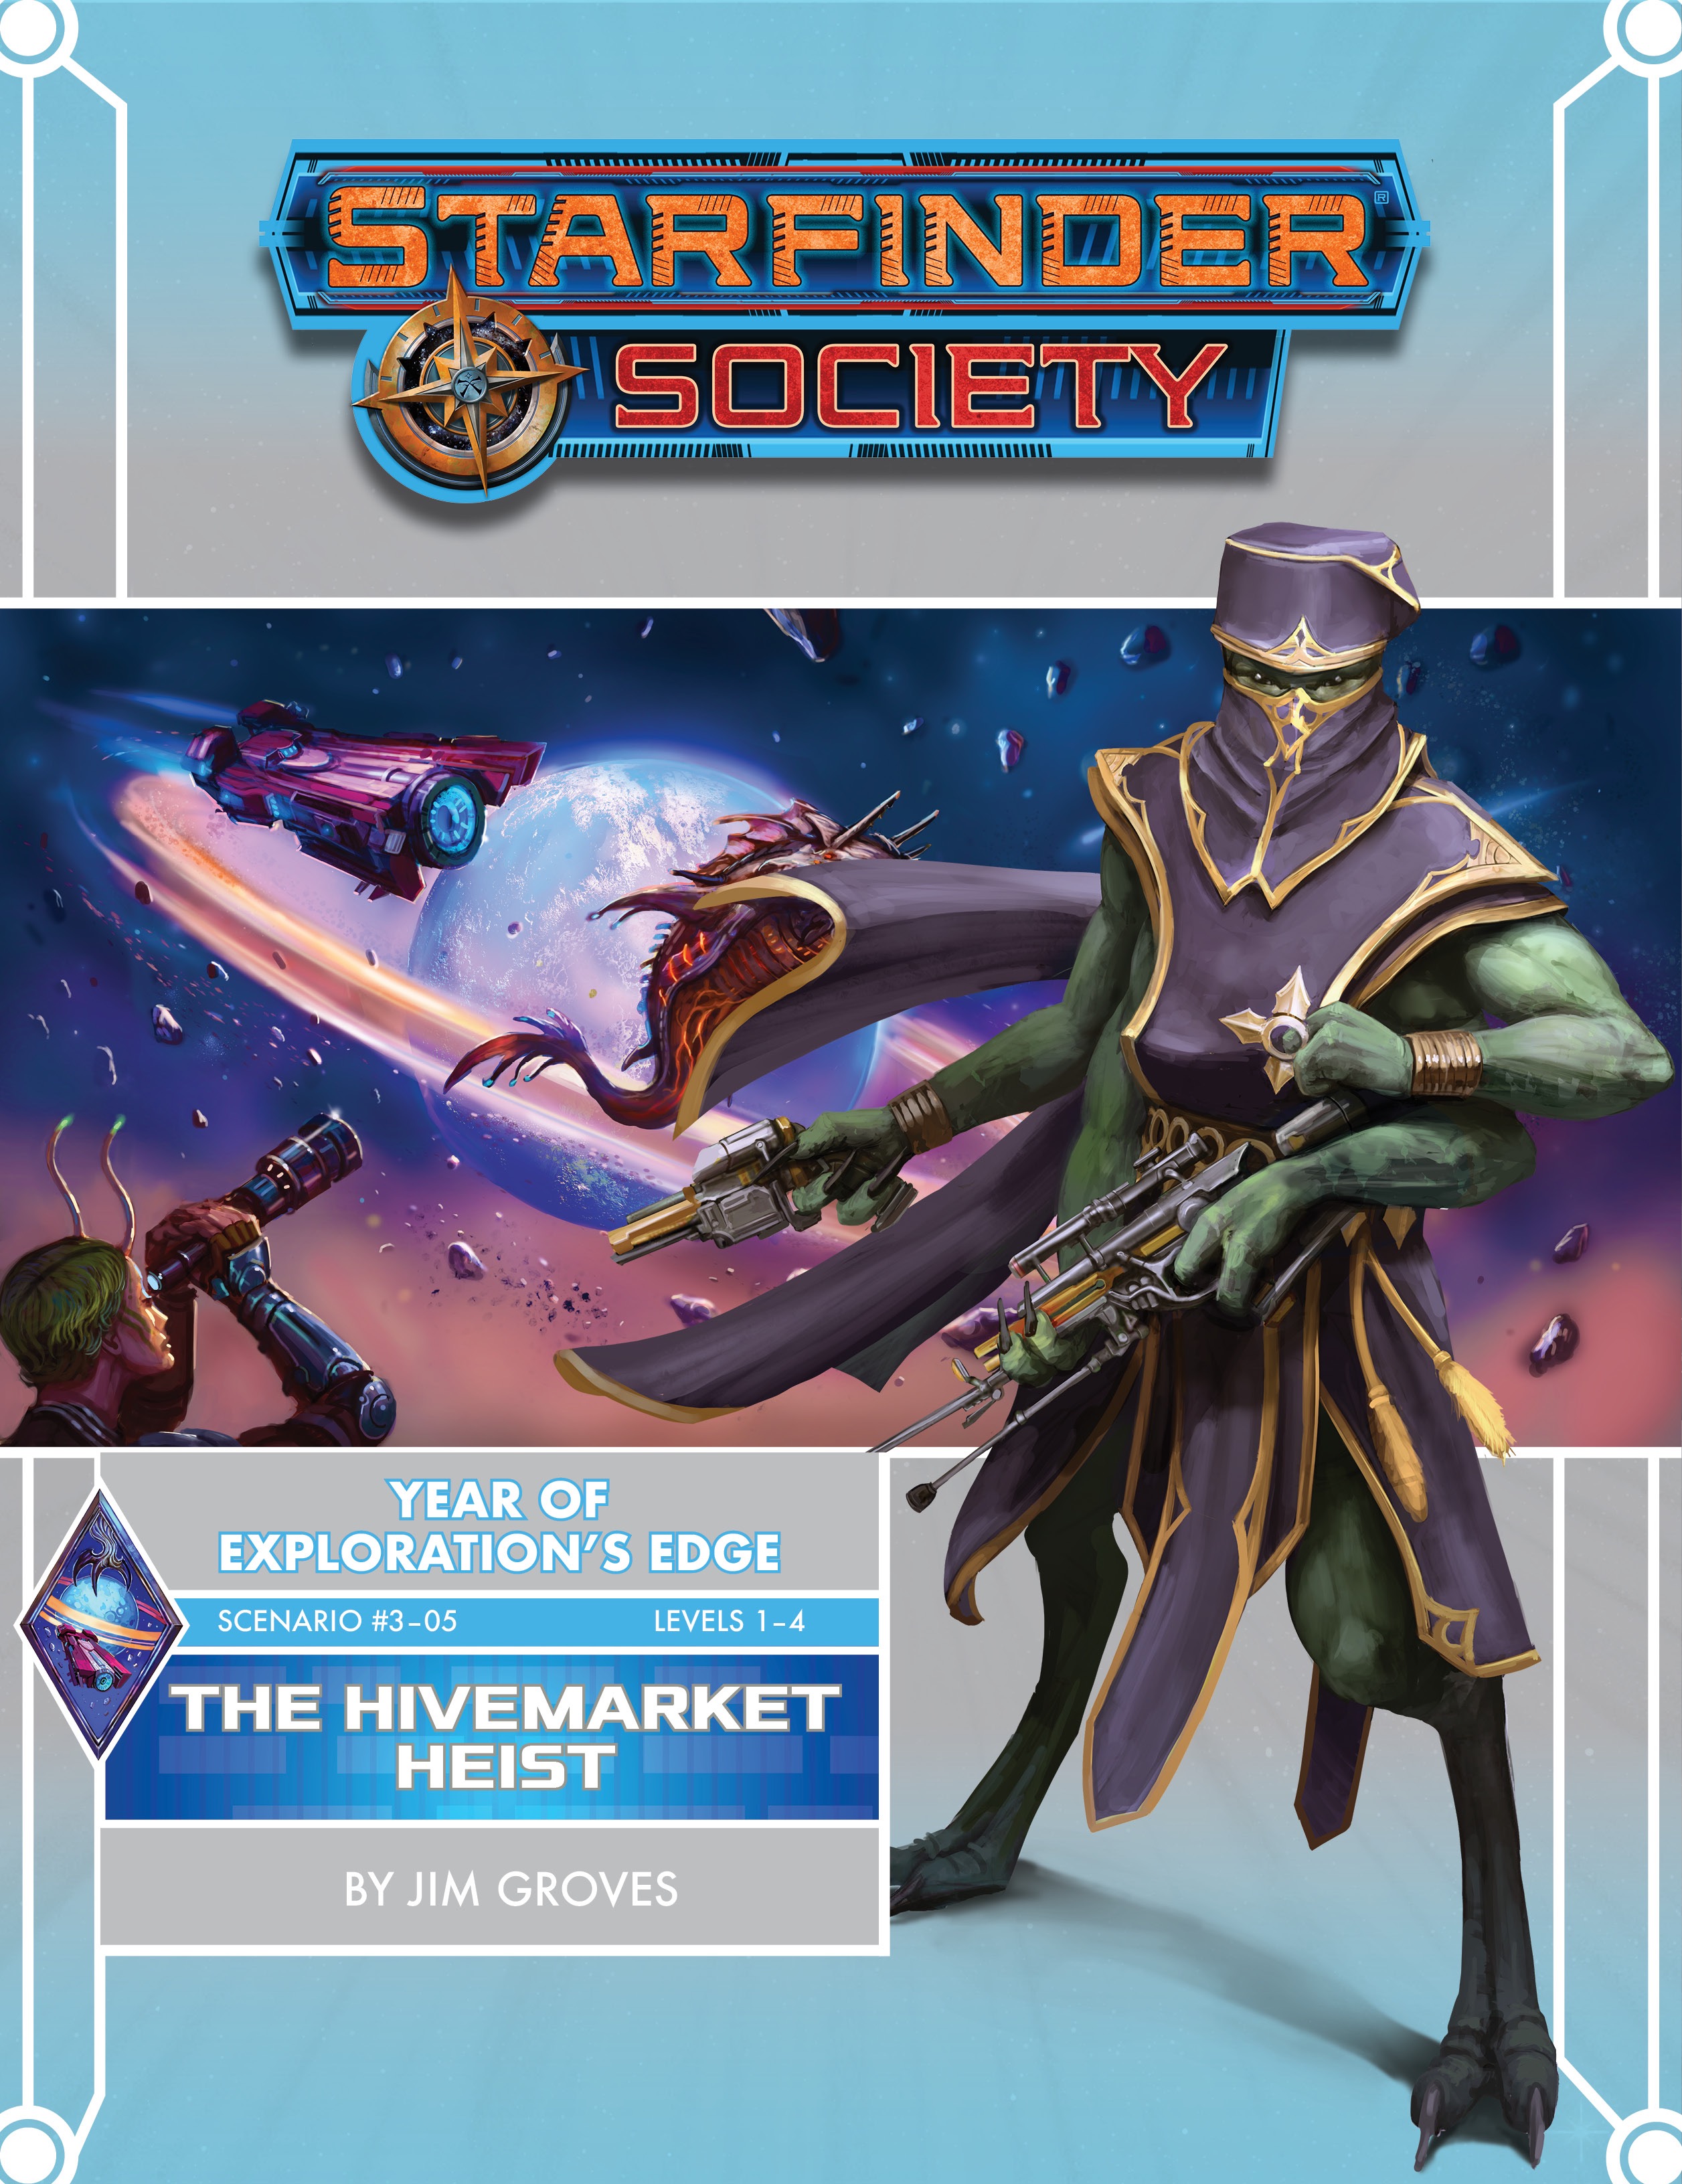 Starfinder Society Year of Exploration's Edge: A 4 armed green alien in purple robes over the image of a ringed planted in space